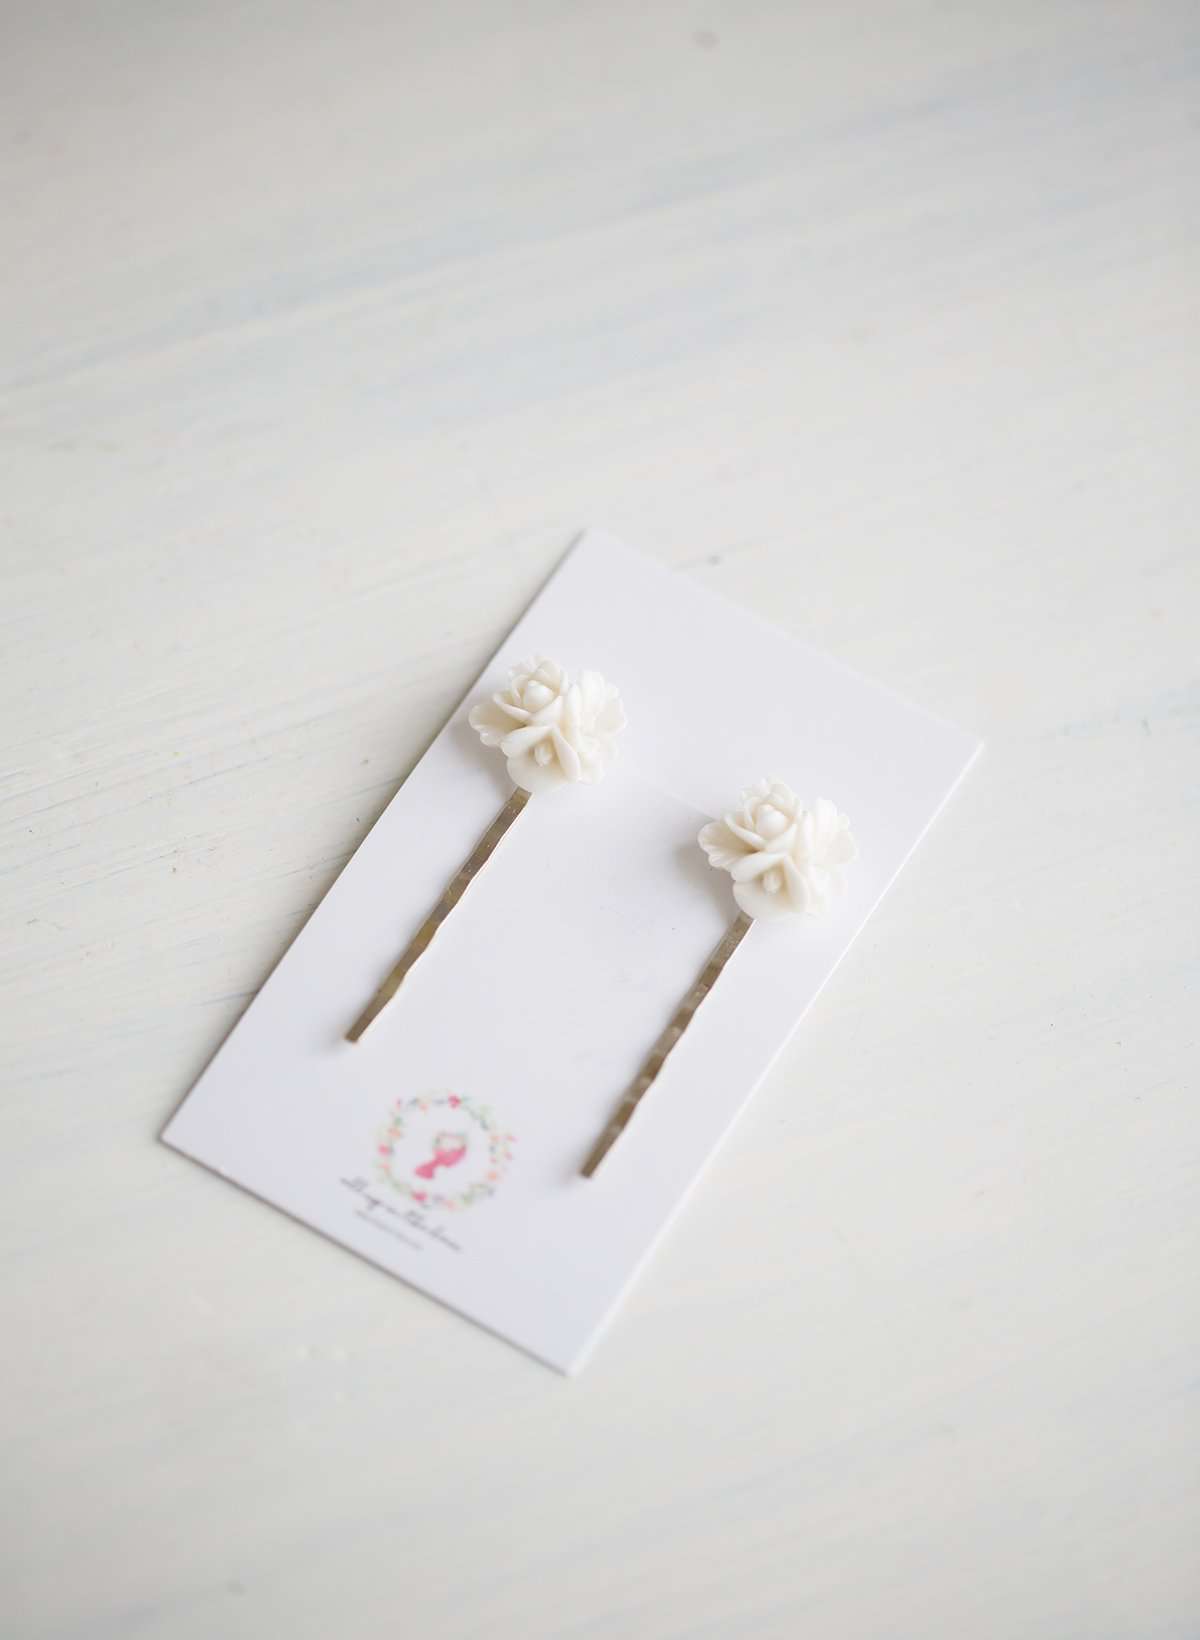 We love these classic, Black Druzy Bobby Pins! These make a fun addition to your hair for small bursts of style. You will find these make a great gift too!